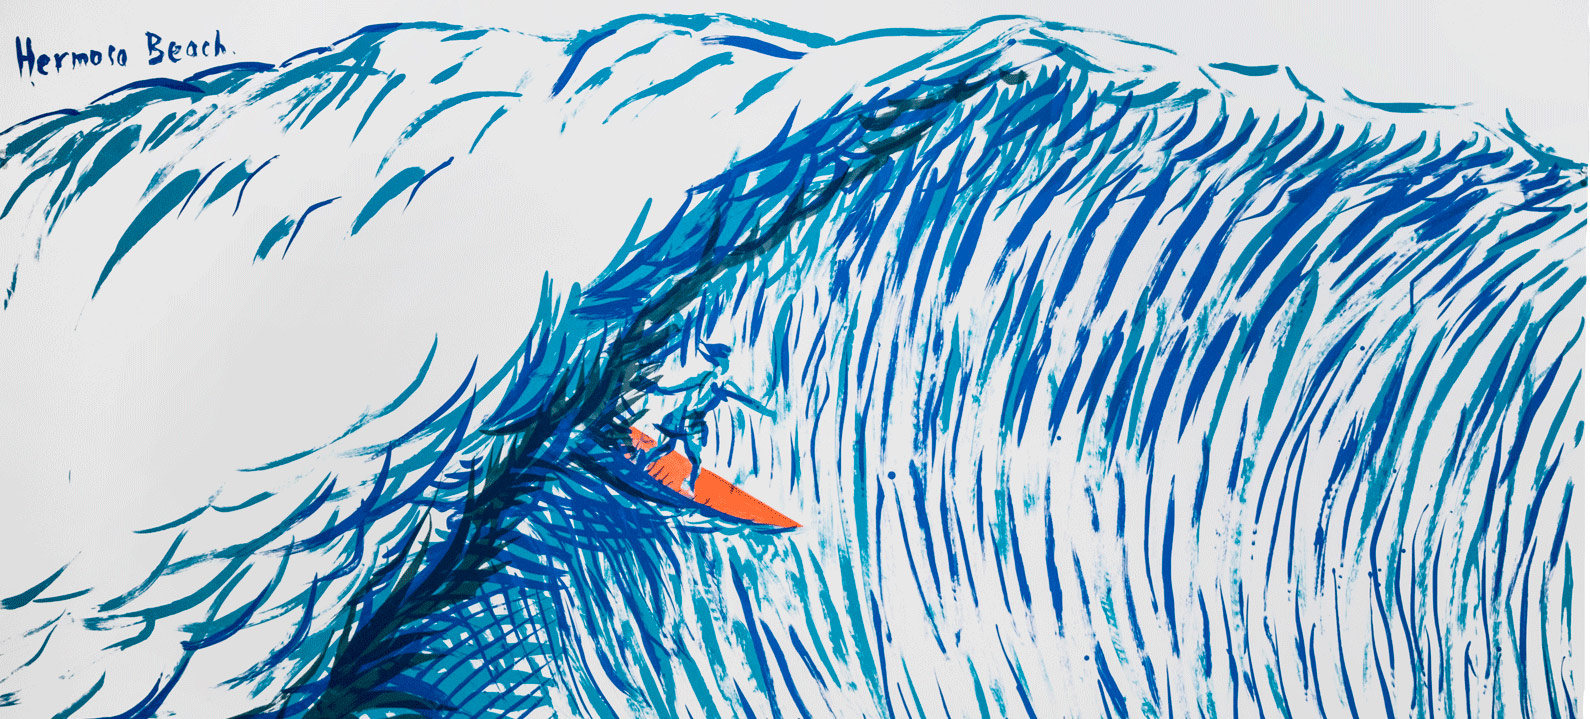 A detail from a work by Raymond Pettibon, titled No Title (Hermosa Beach), dated 2019.